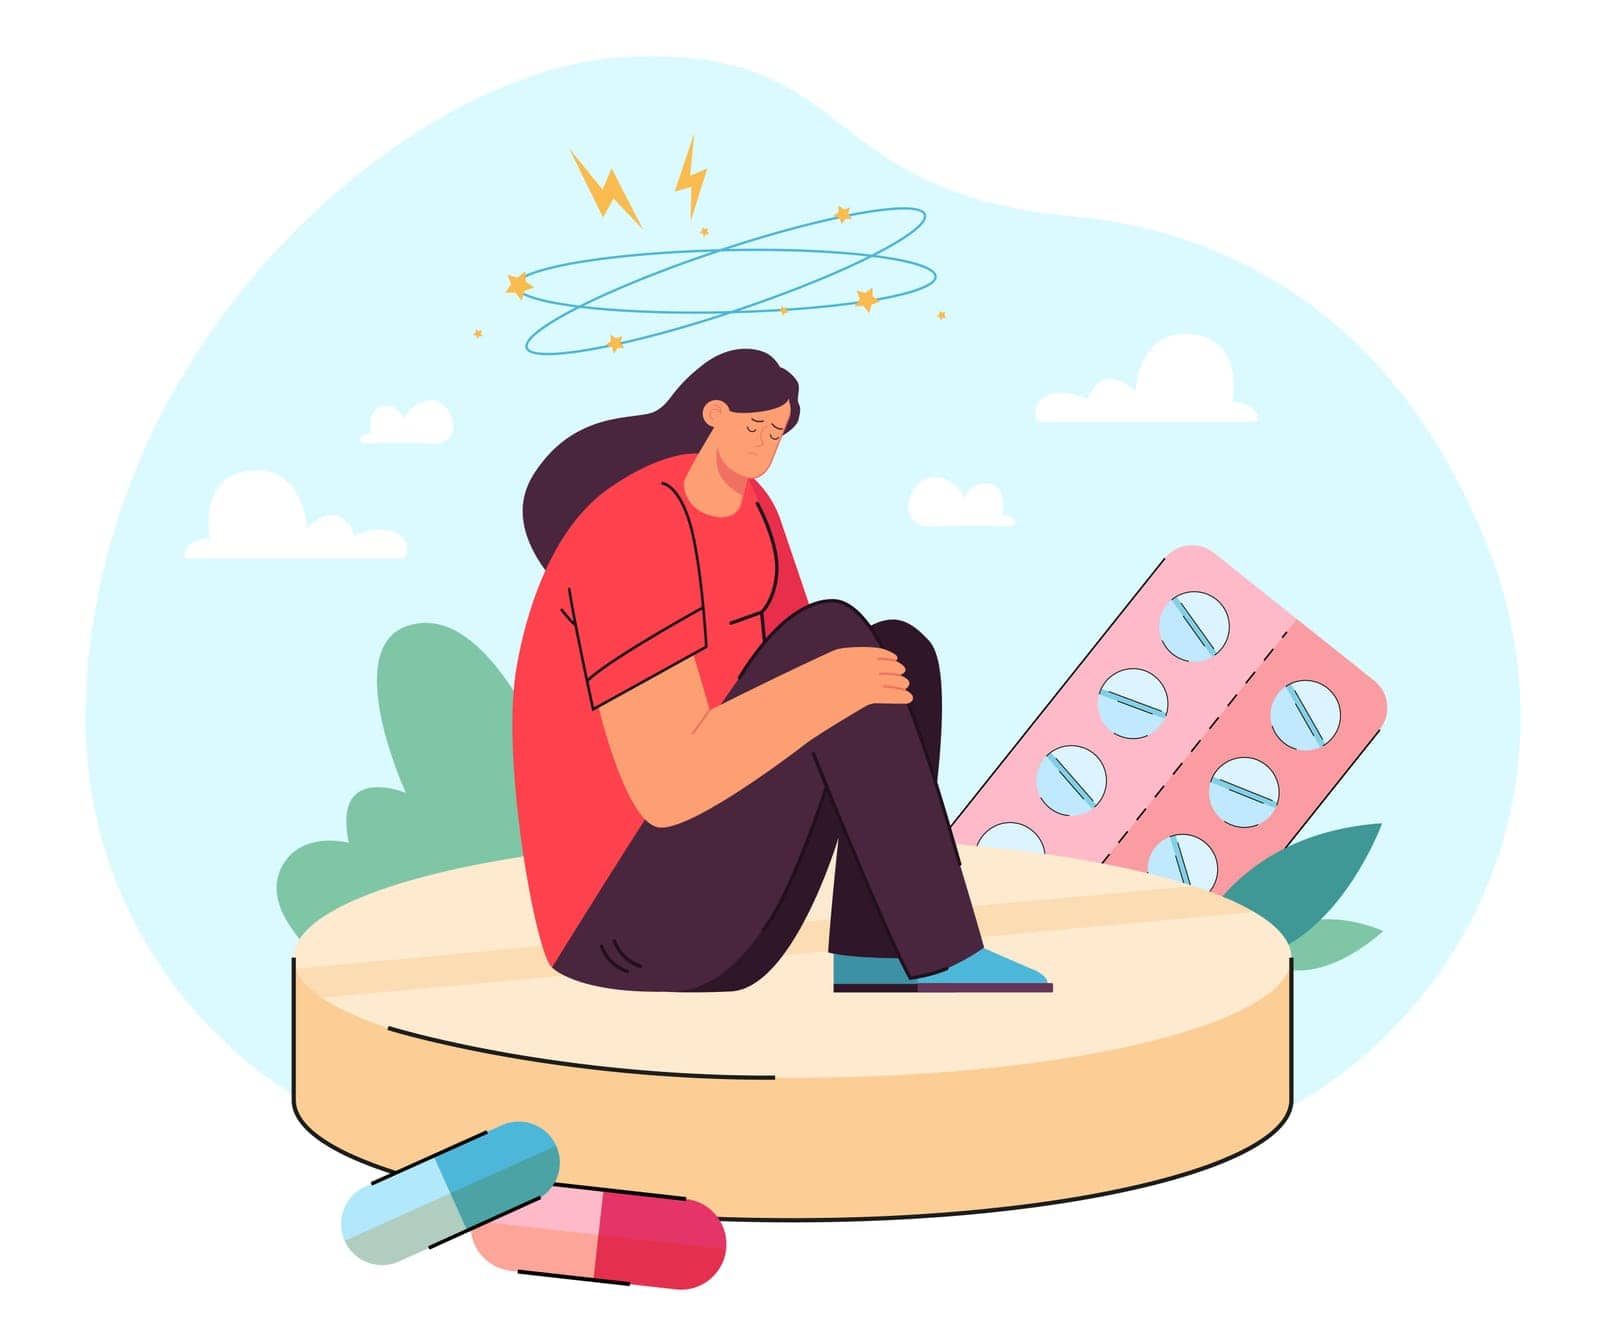 Tiny, depressed woman with anxiety sitting on large pill surrounded by drugs. Antidepressant addict girl flat vector illustration. Hormonal mood, depression, placebo, health problem concept